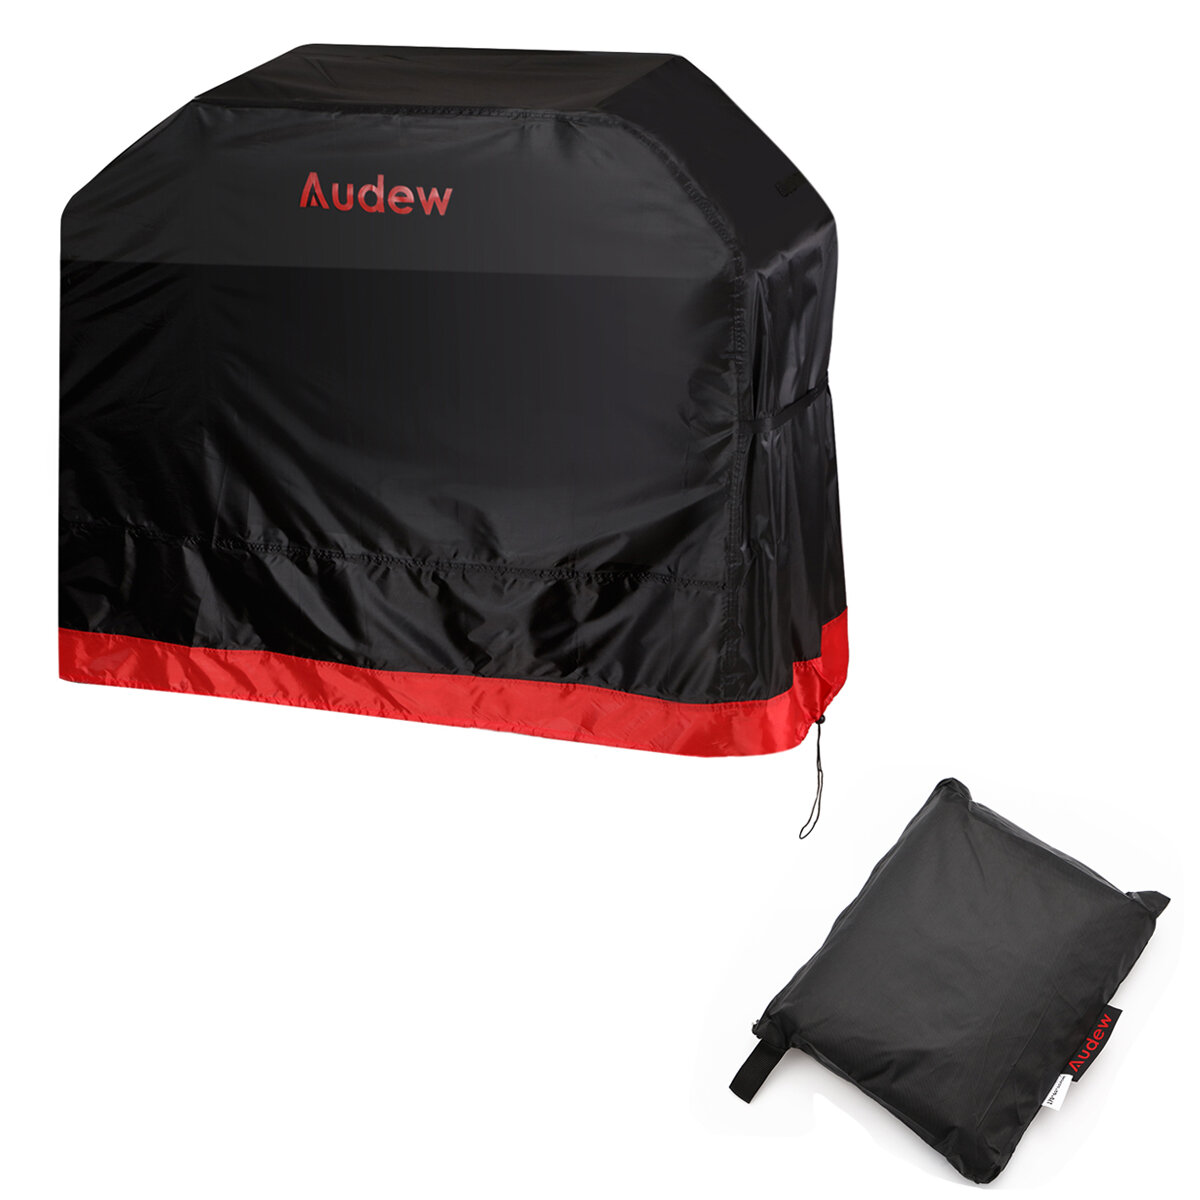 AUDEW 210D 67x24x46 inch BBQ Grill Cover Waterproof Dust Rain UV Proof Protector Gas Barbecue Cover Outdoor Camping Picn